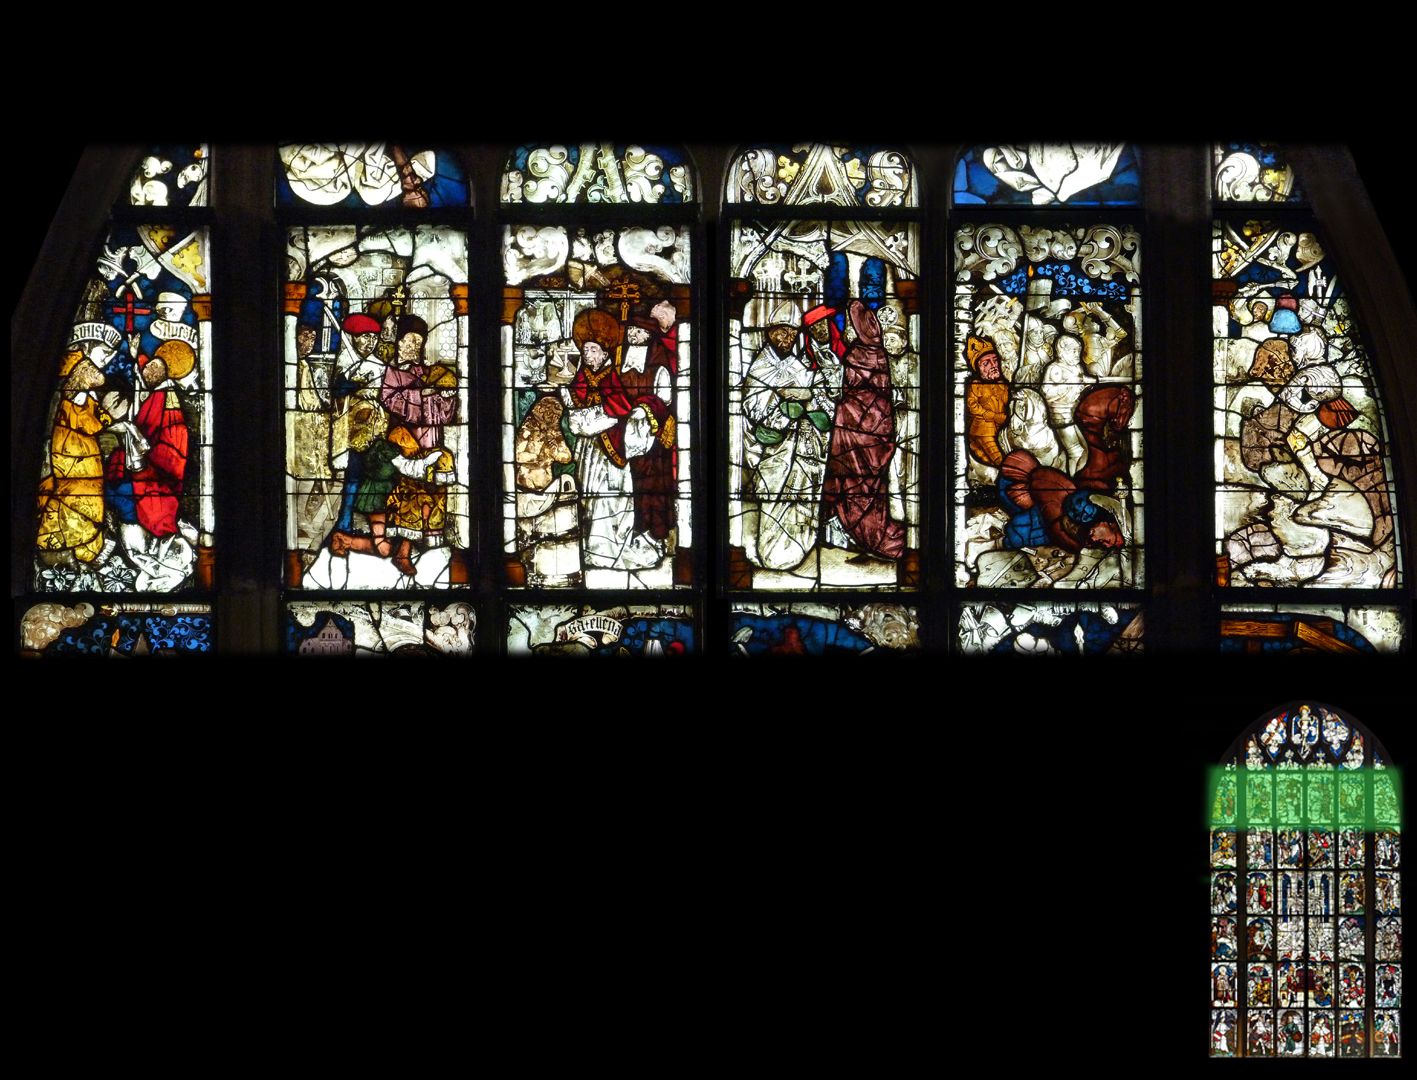 Imperial window 6th line: Depiction of the Silvester-Constantine legend.